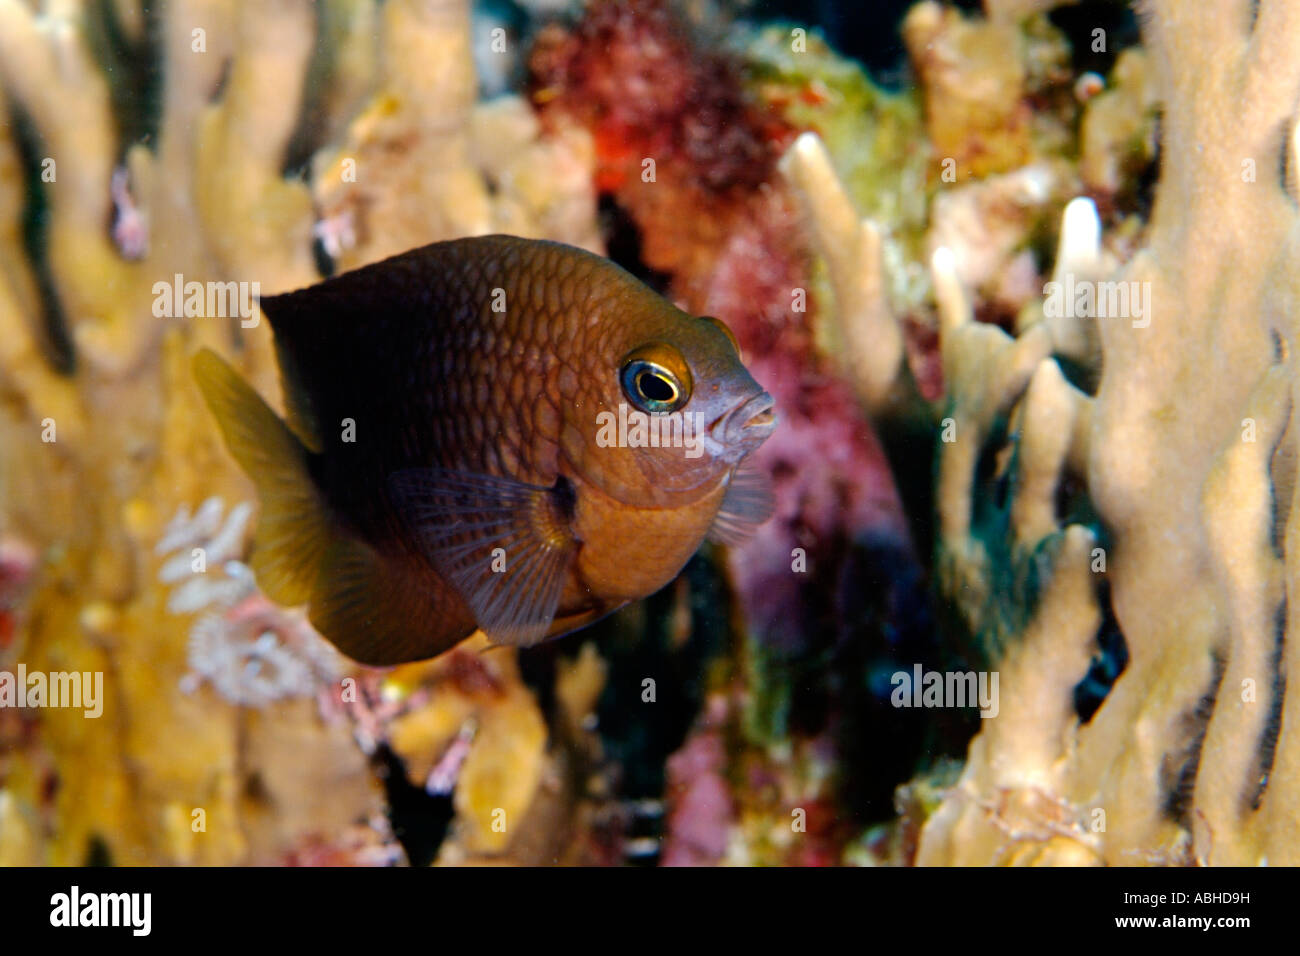 Beaugregory fish in Bonaire Stock Photo